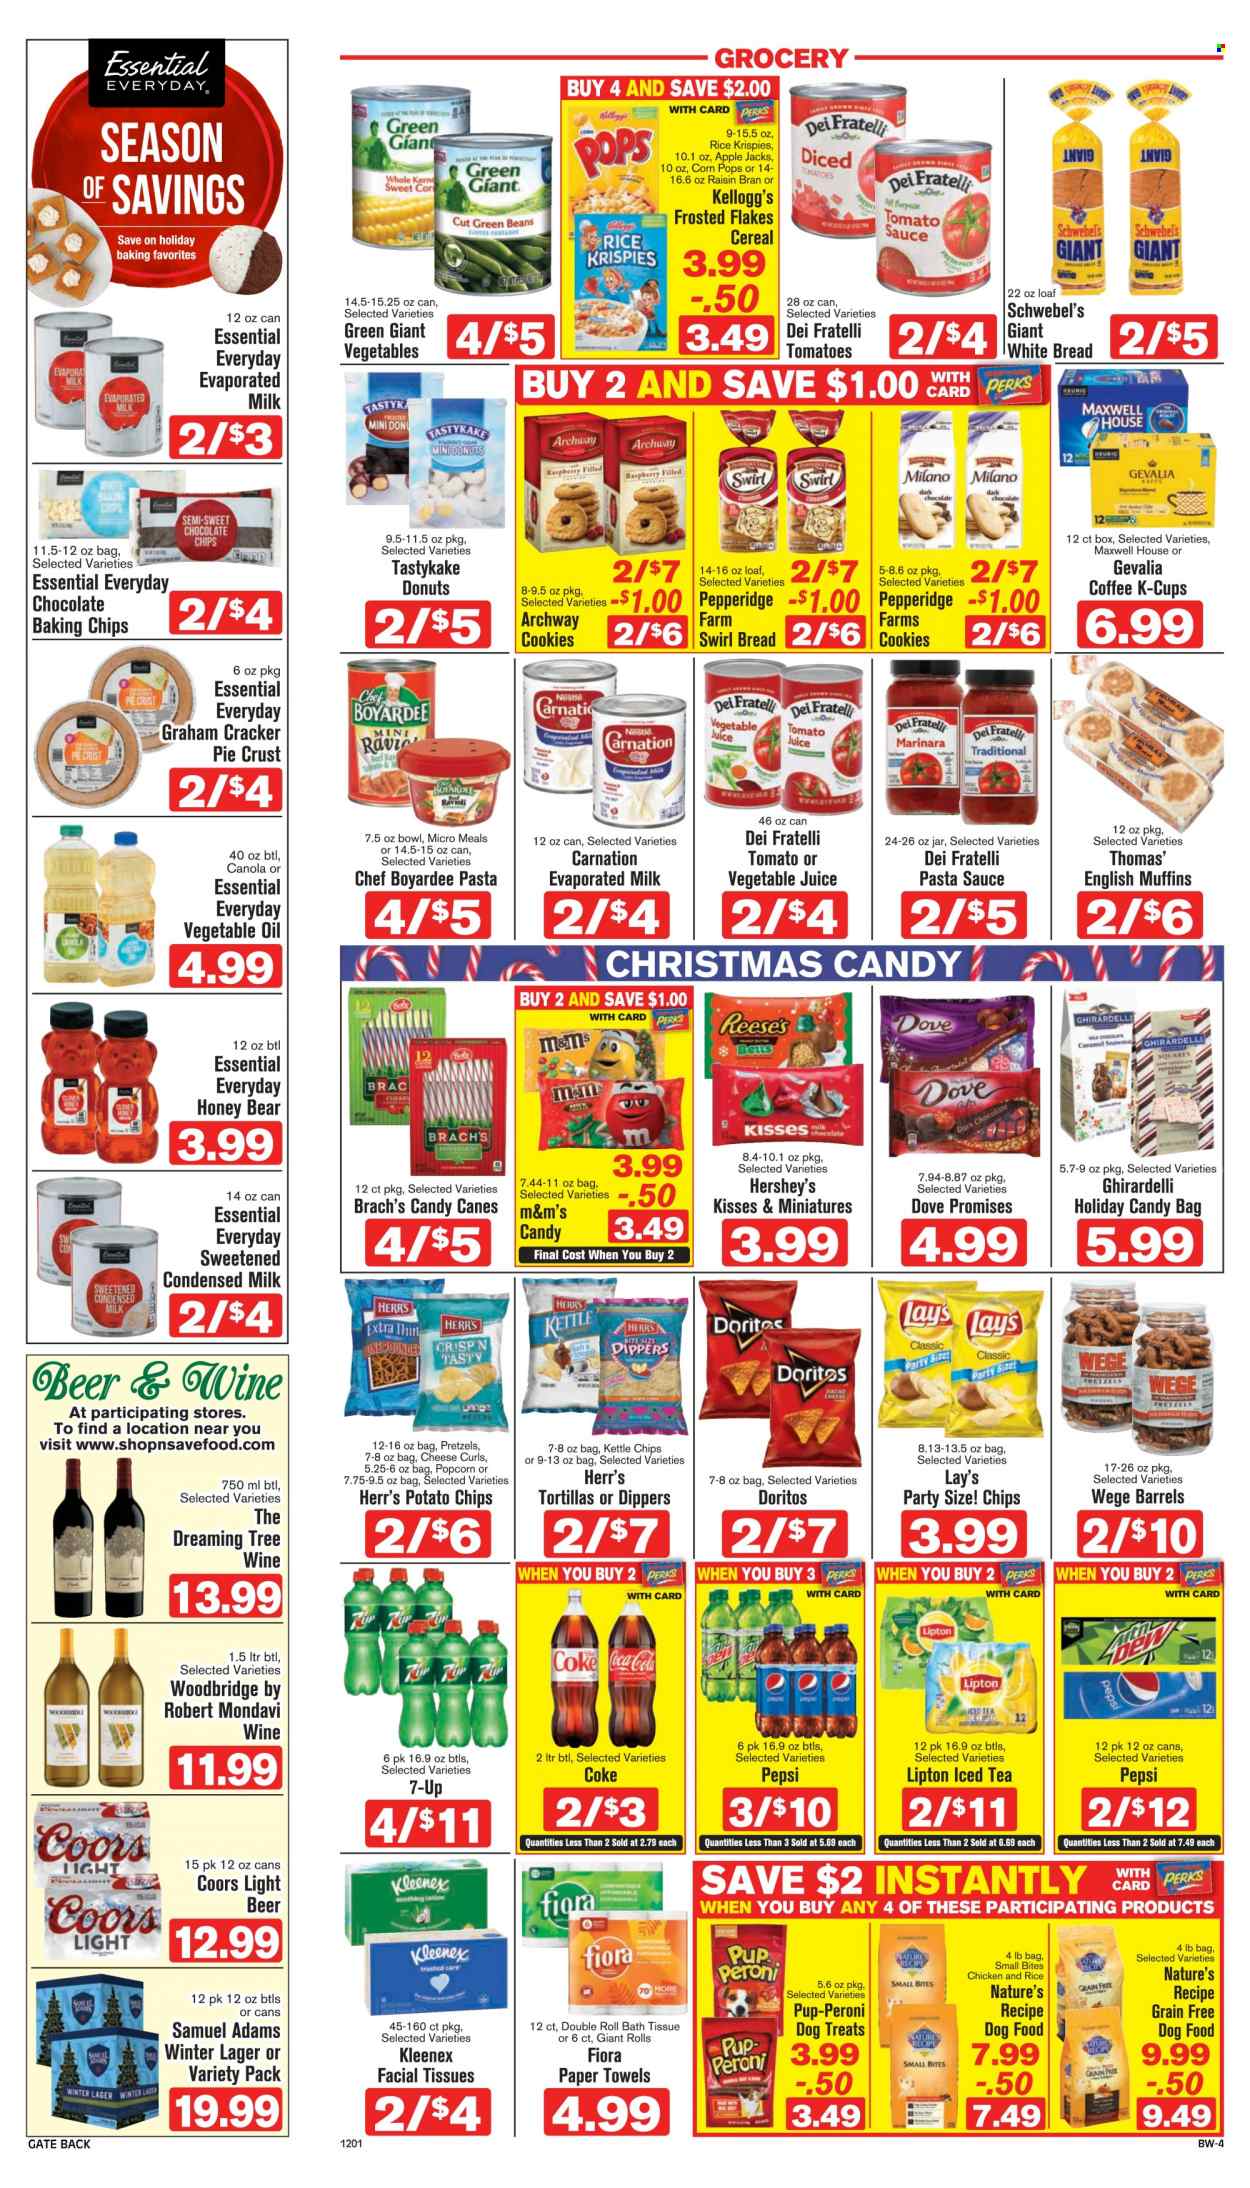 thumbnail - Shop ‘n Save Flyer - 12/01/2022 - 12/07/2022 - Sales products - bread, english muffins, tortillas, white bread, pretzels, donut, green beans, ravioli, pasta sauce, sauce, evaporated milk, condensed milk, Reese's, Hershey's, cookies, Dove, Nestlé, M&M's, crackers, Kellogg's, Ghirardelli, Dove Promises, Doritos, potato chips, Lay’s, popcorn, pie crust, baking chips, tomato sauce, Chef Boyardee, diced tomatoes, cereals, Rice Krispies, Frosted Flakes, Corn Pops, Raisin Bran, caramel, vegetable oil, oil, honey, peanut butter, Coca-Cola, tomato juice, Pepsi, juice, Lipton, ice tea, 7UP, vegetable juice, Maxwell House, coffee, coffee capsules, K-Cups, Gevalia, Woodbridge by Robert Mondavi, Woodbridge, beer, Lager, bath tissue, Kleenex, kitchen towels, paper towels, facial tissues, body lotion, animal food, dog food, Pup-Peroni, Coors. Page 4.